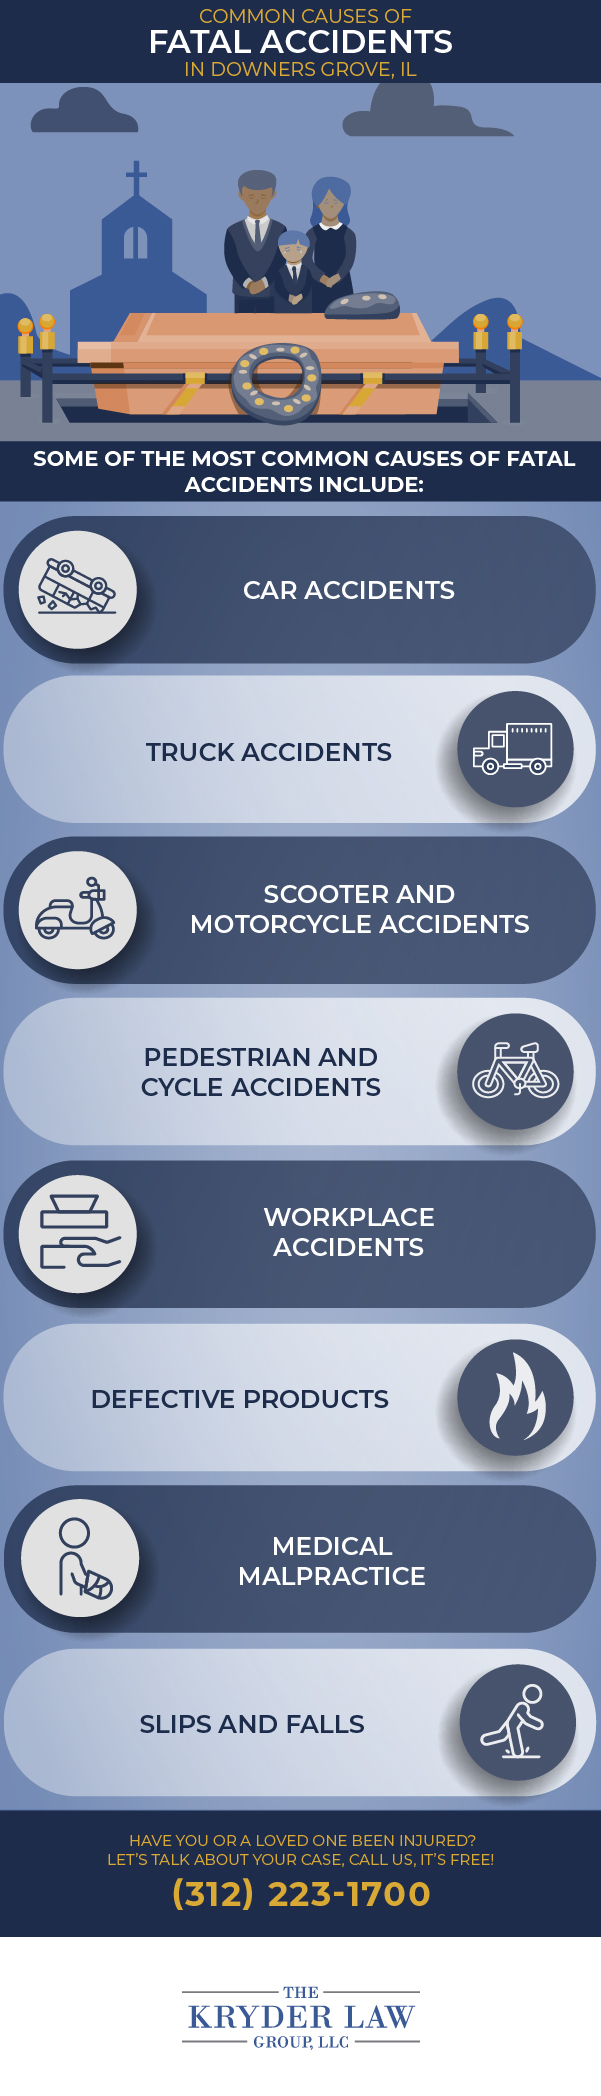 Common Causes of Fatal Accidents in Downers Grove, IL